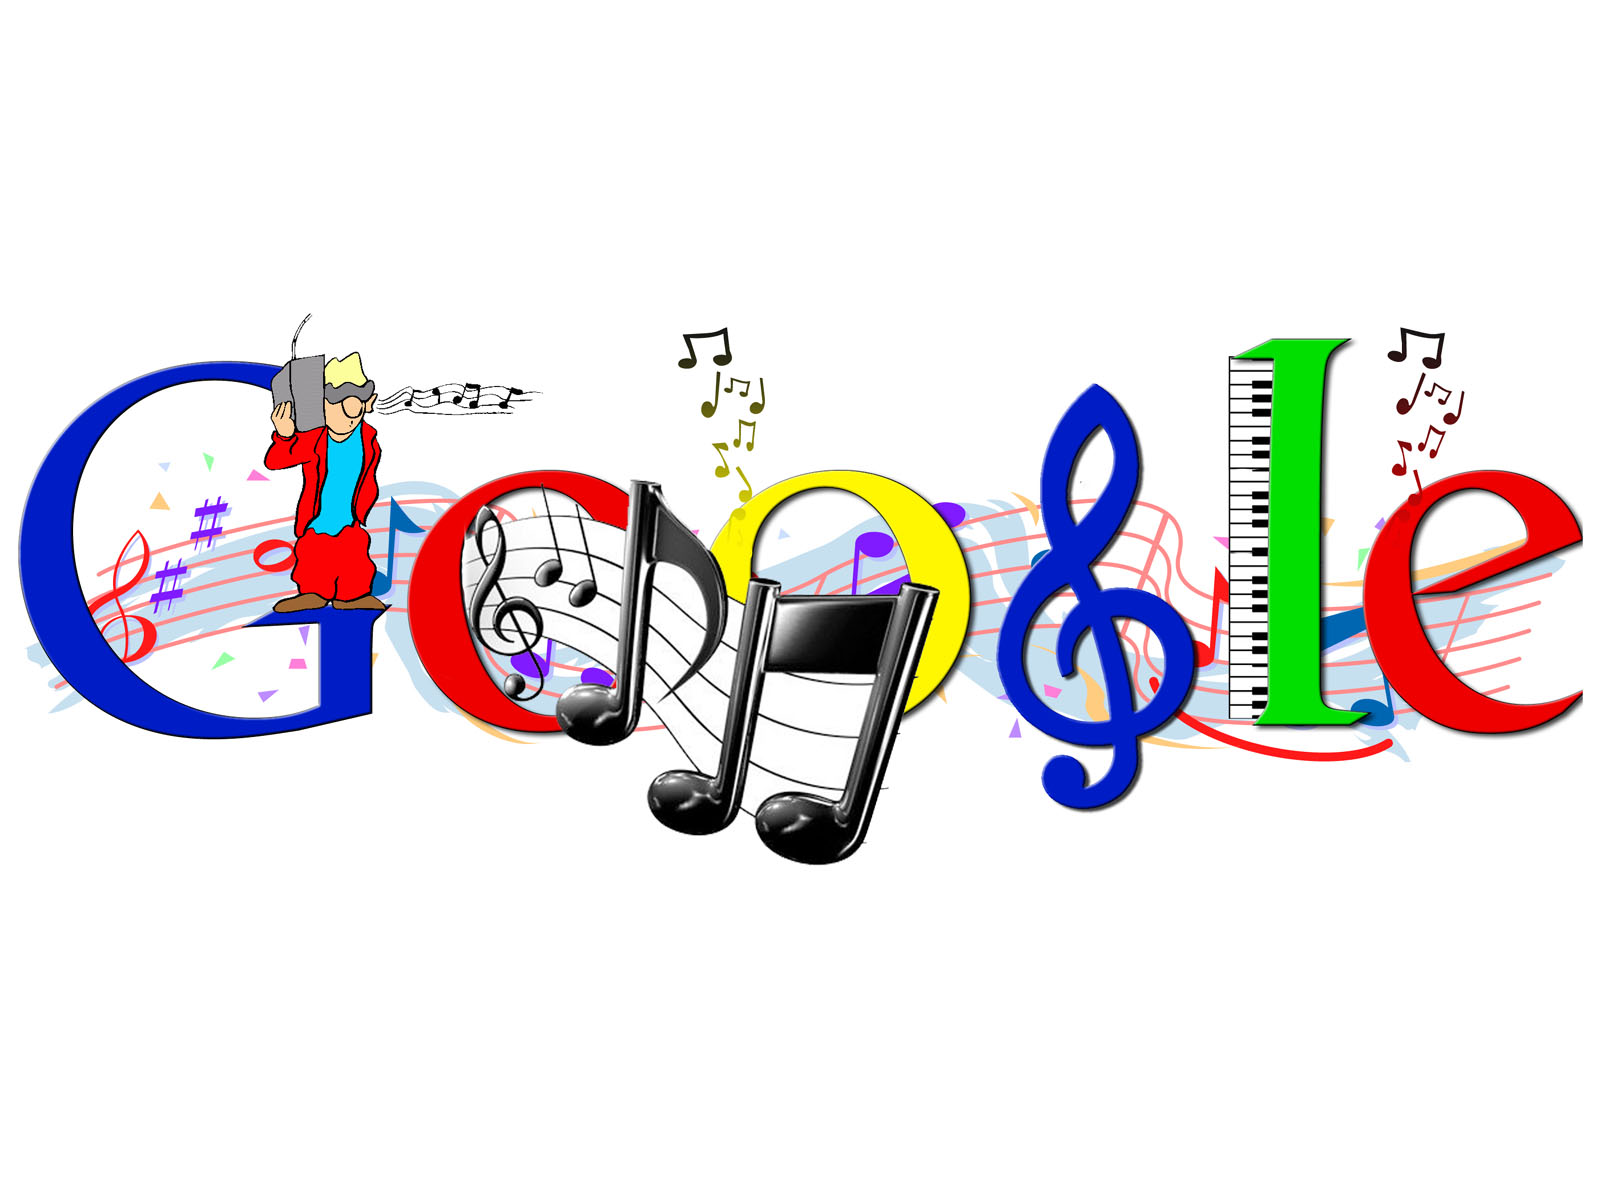 Are Watching The Google Wallpaper In Category Of